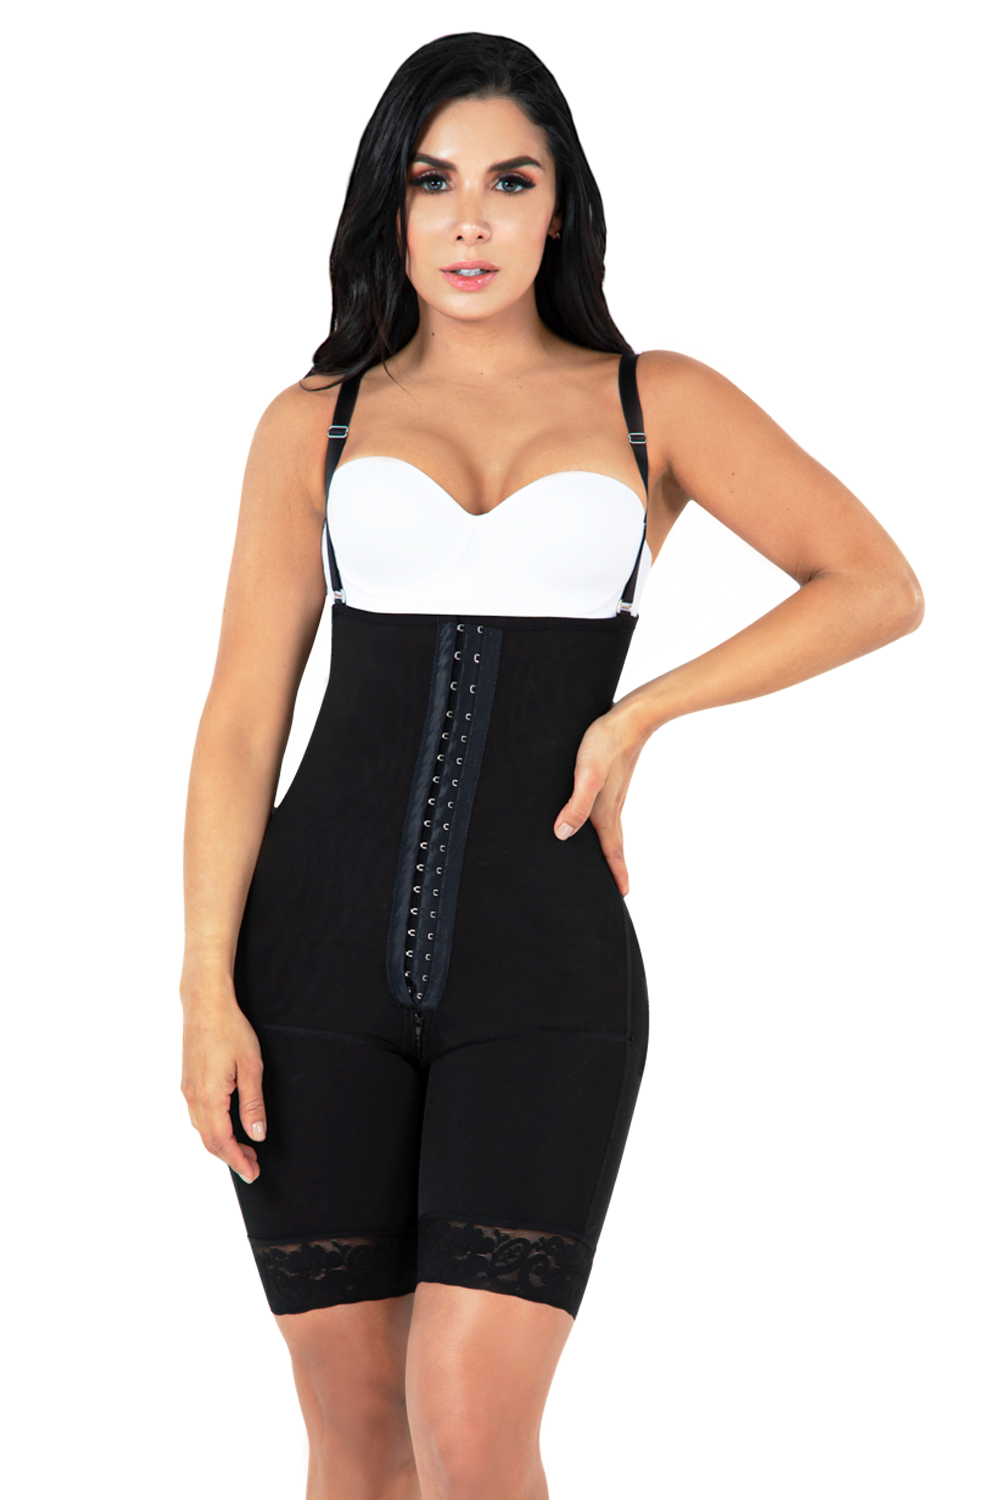 Jackie London Panty Body Shaper With Covered Back